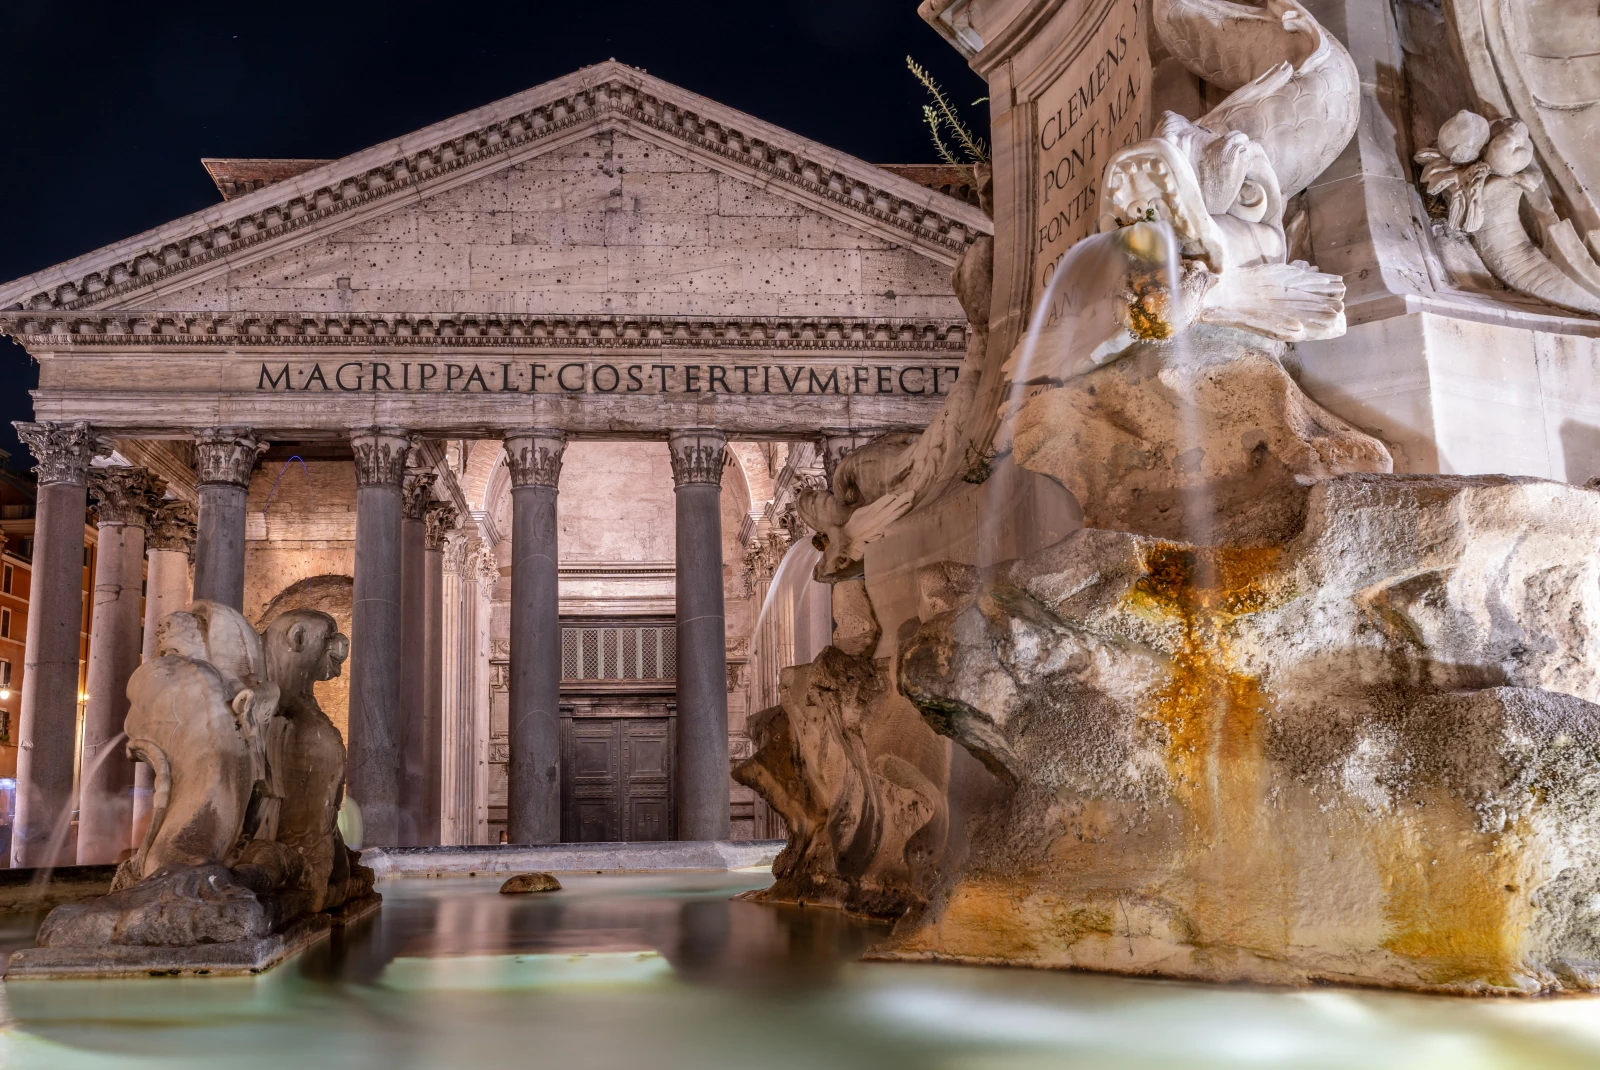 The Pantheon in Rome, Italy at night lit up with white lights reflecting on the stone.